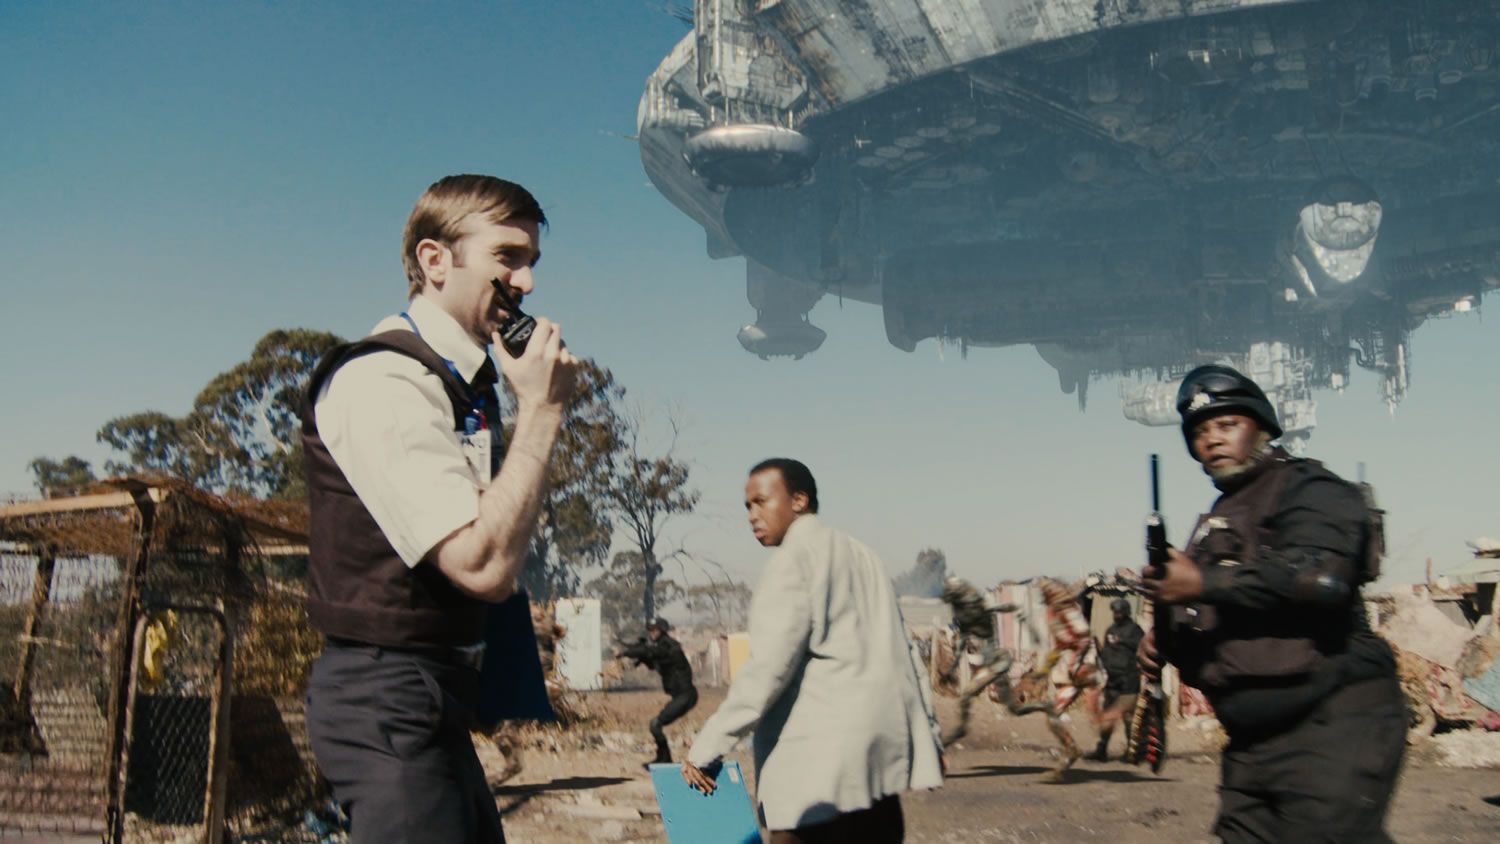 A screenshot of Wikus from the movie District 9.